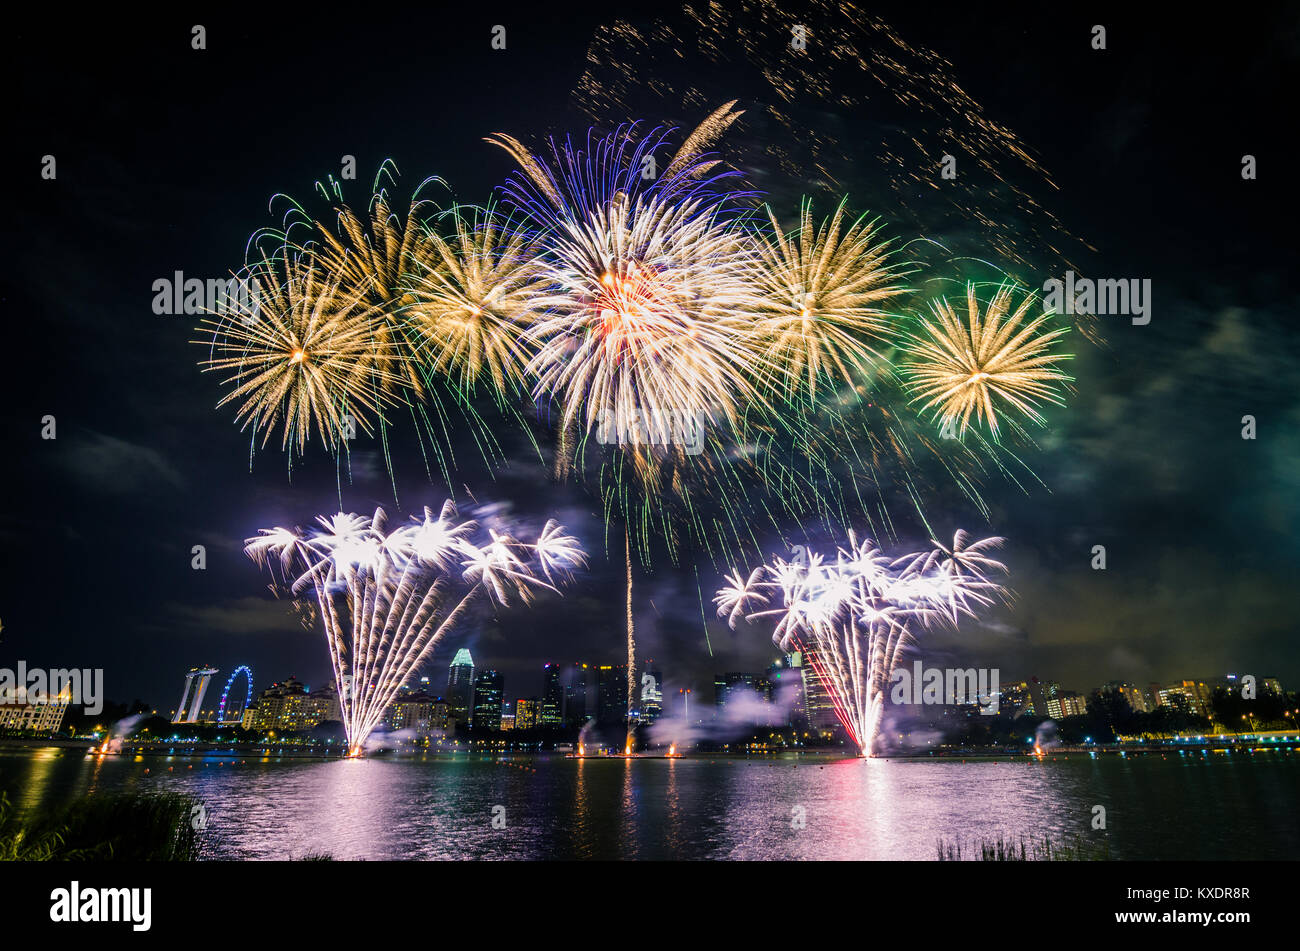 Firework display for Singapore National day which celebrated every year on August 9, in commemoration of the Singapore's independence in 1965. Stock Photo